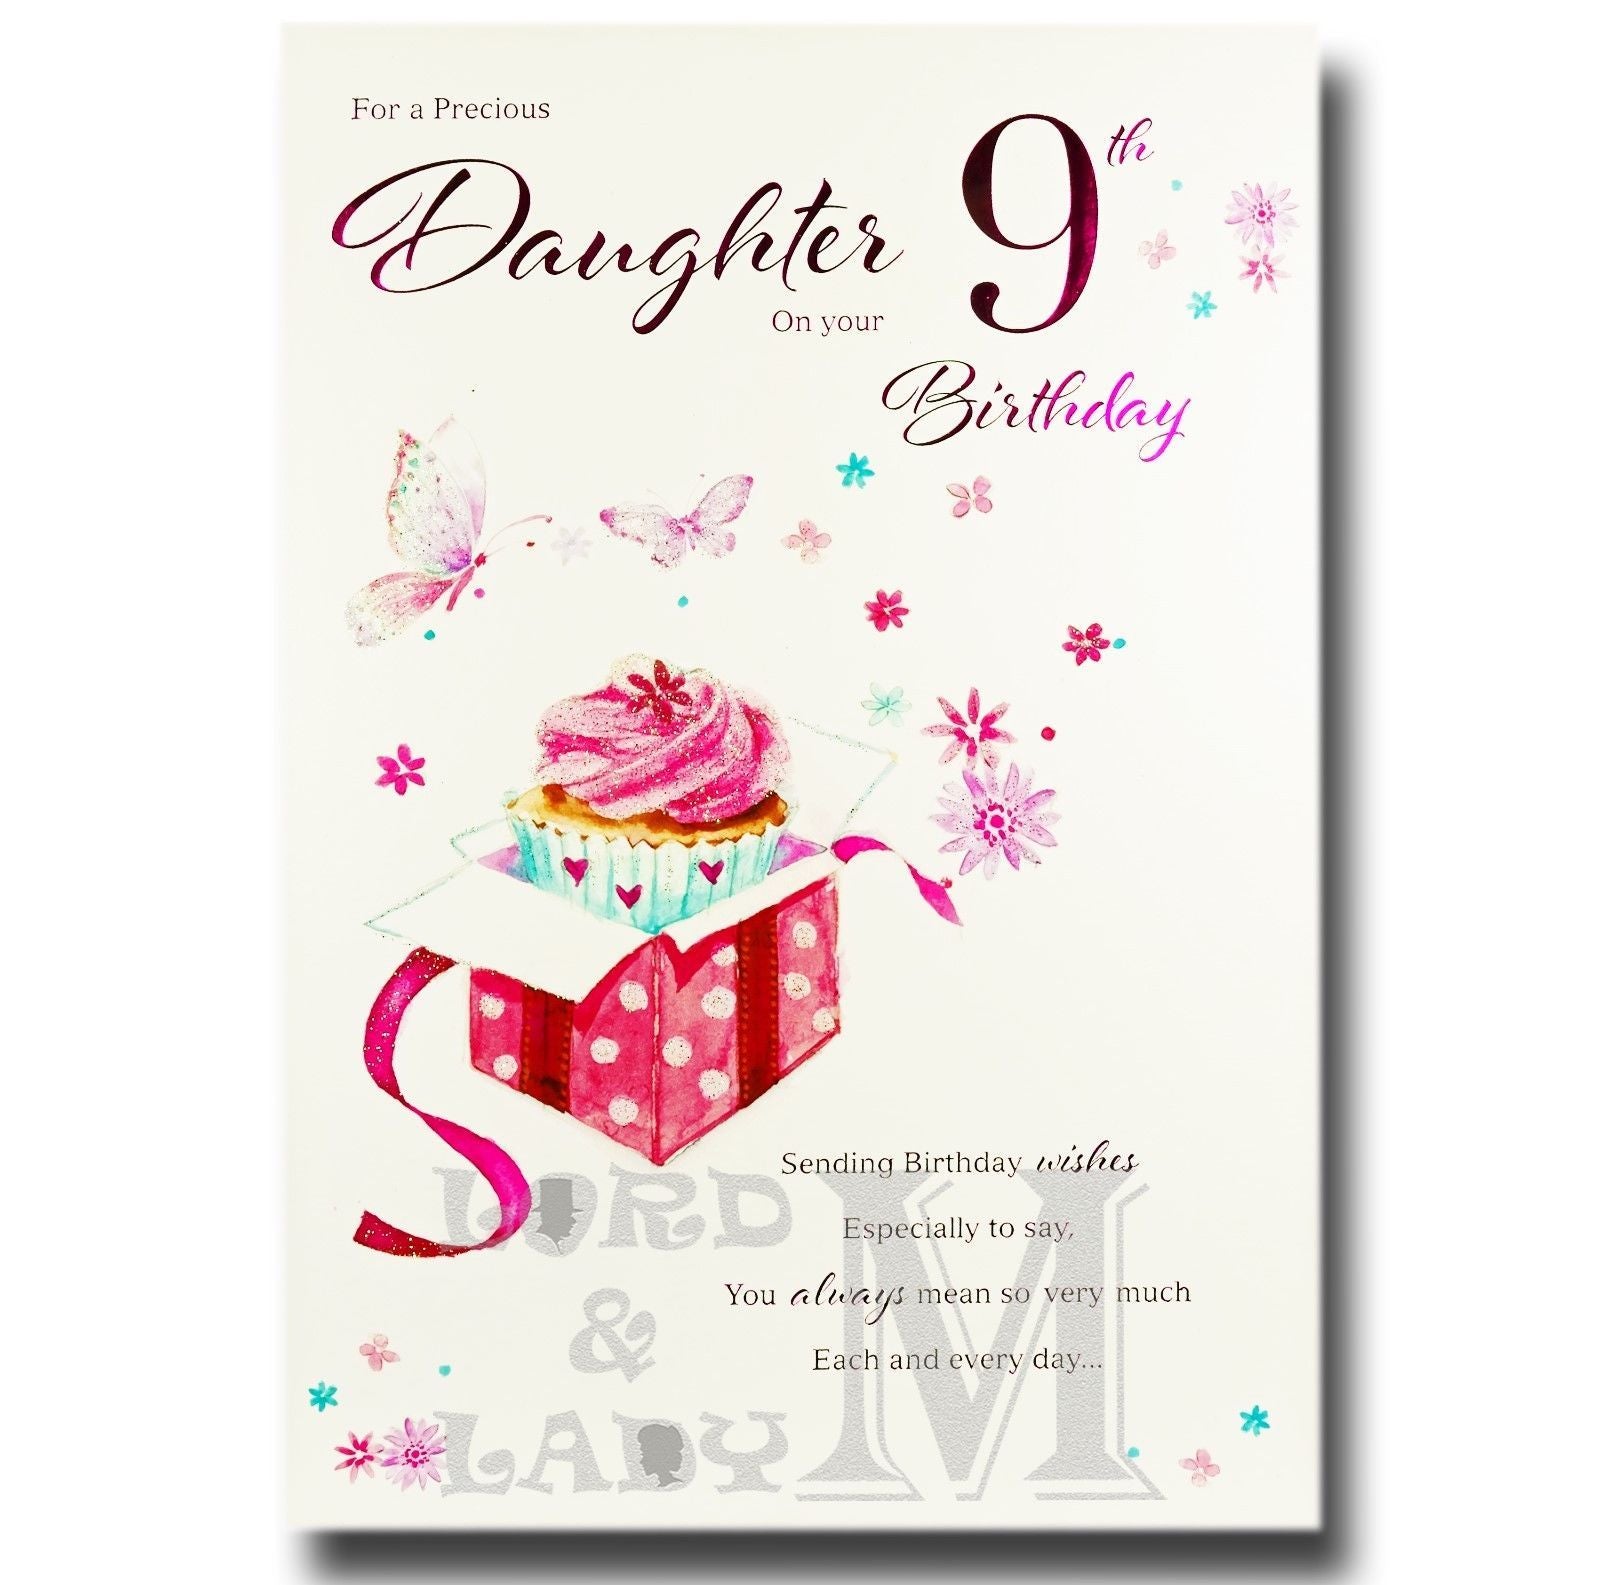 23cm - For A Precious Daughter On Your 9th ... - E